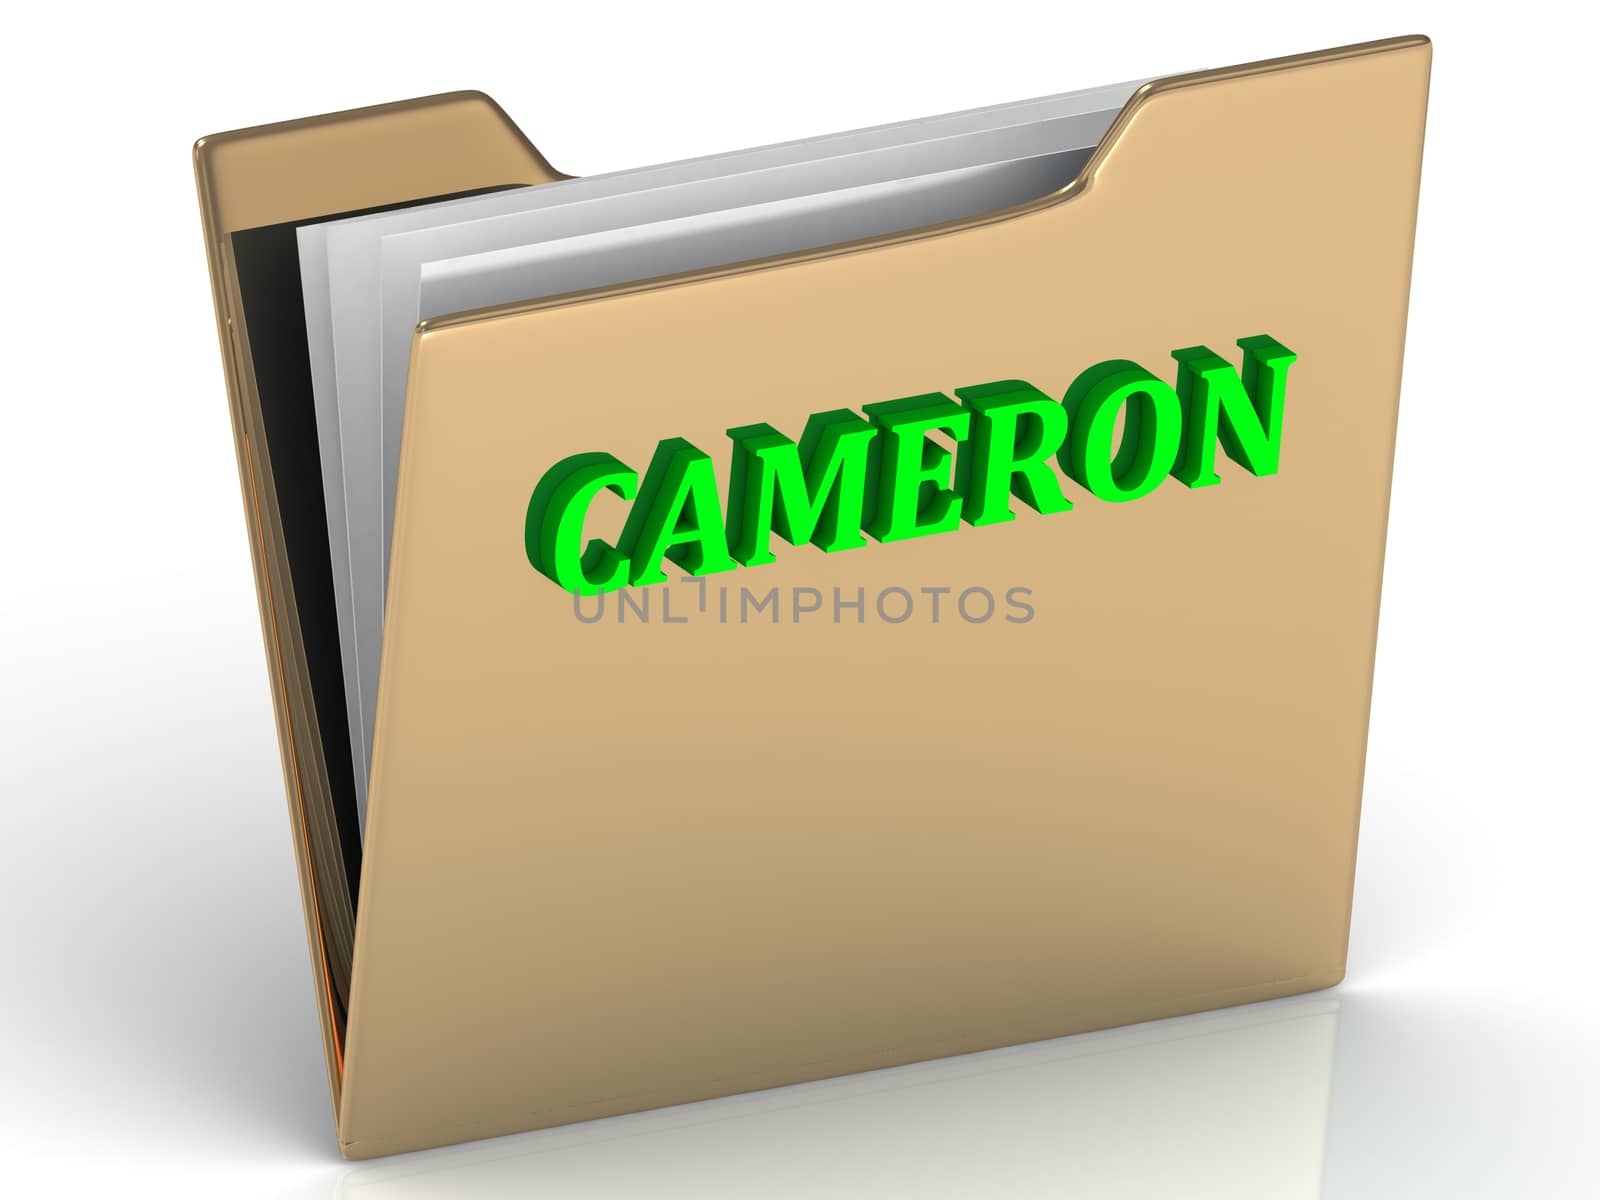 CAMERON- bright green letters on gold paperwork folder on a white background